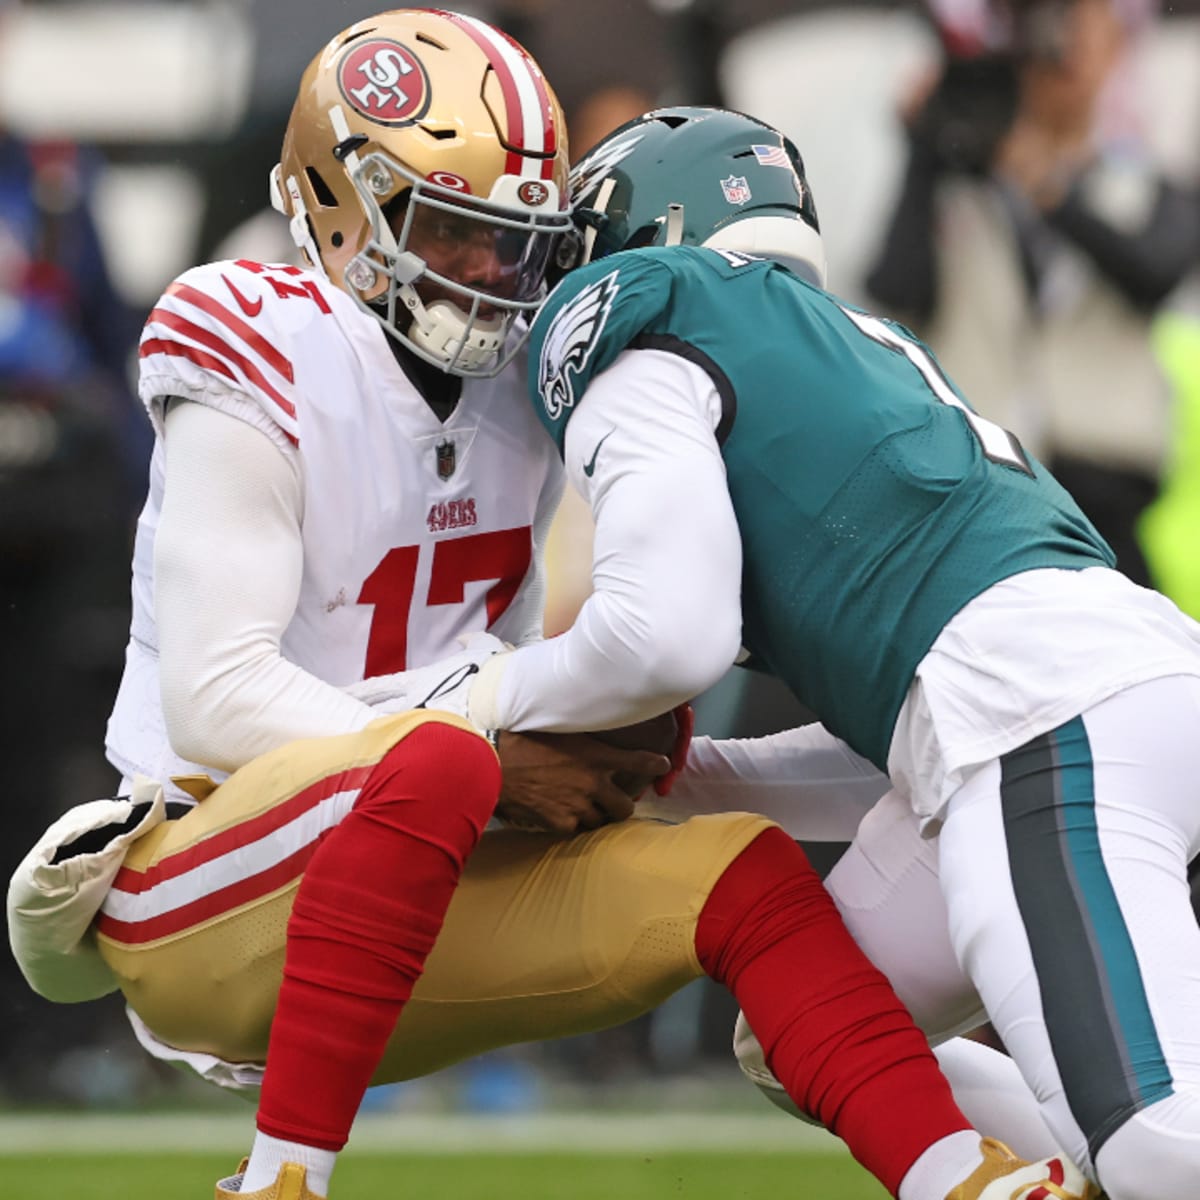 Eagles-49ers NFC Championship Game line changed quickly after